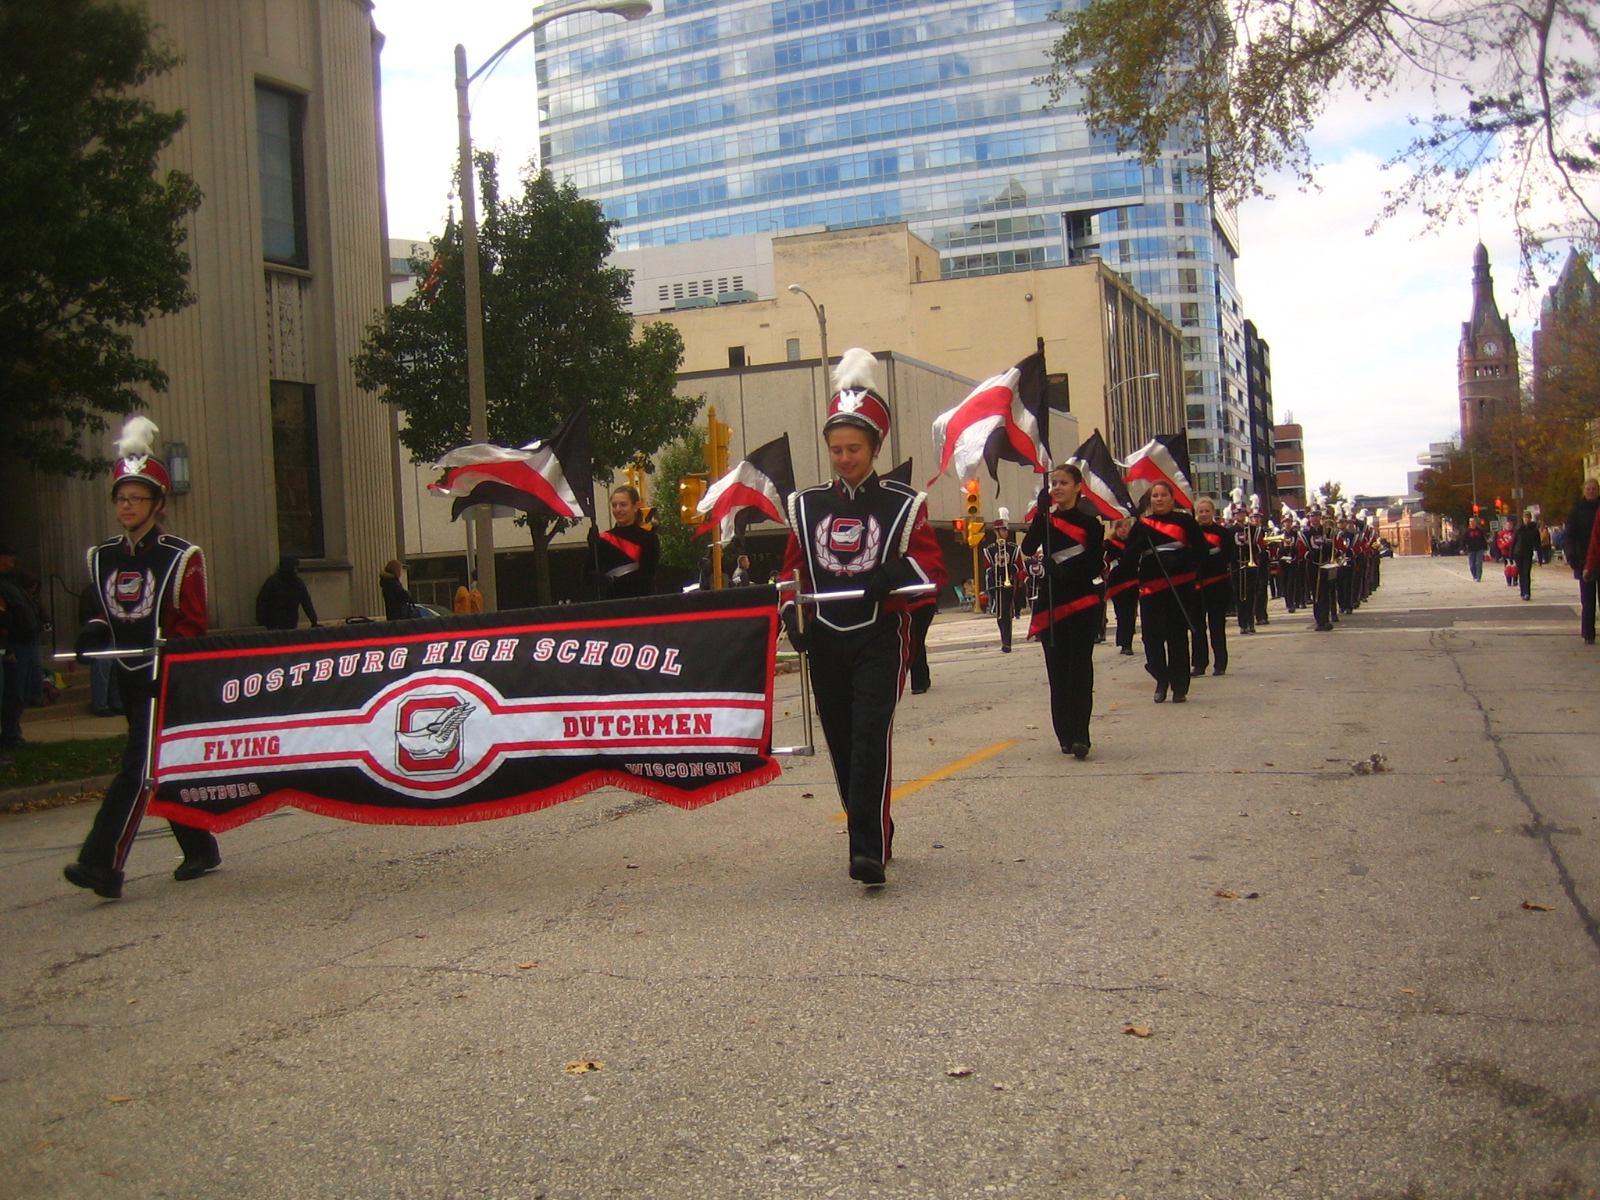 The Oostburg High School Flying Dutchman marching in the parade.